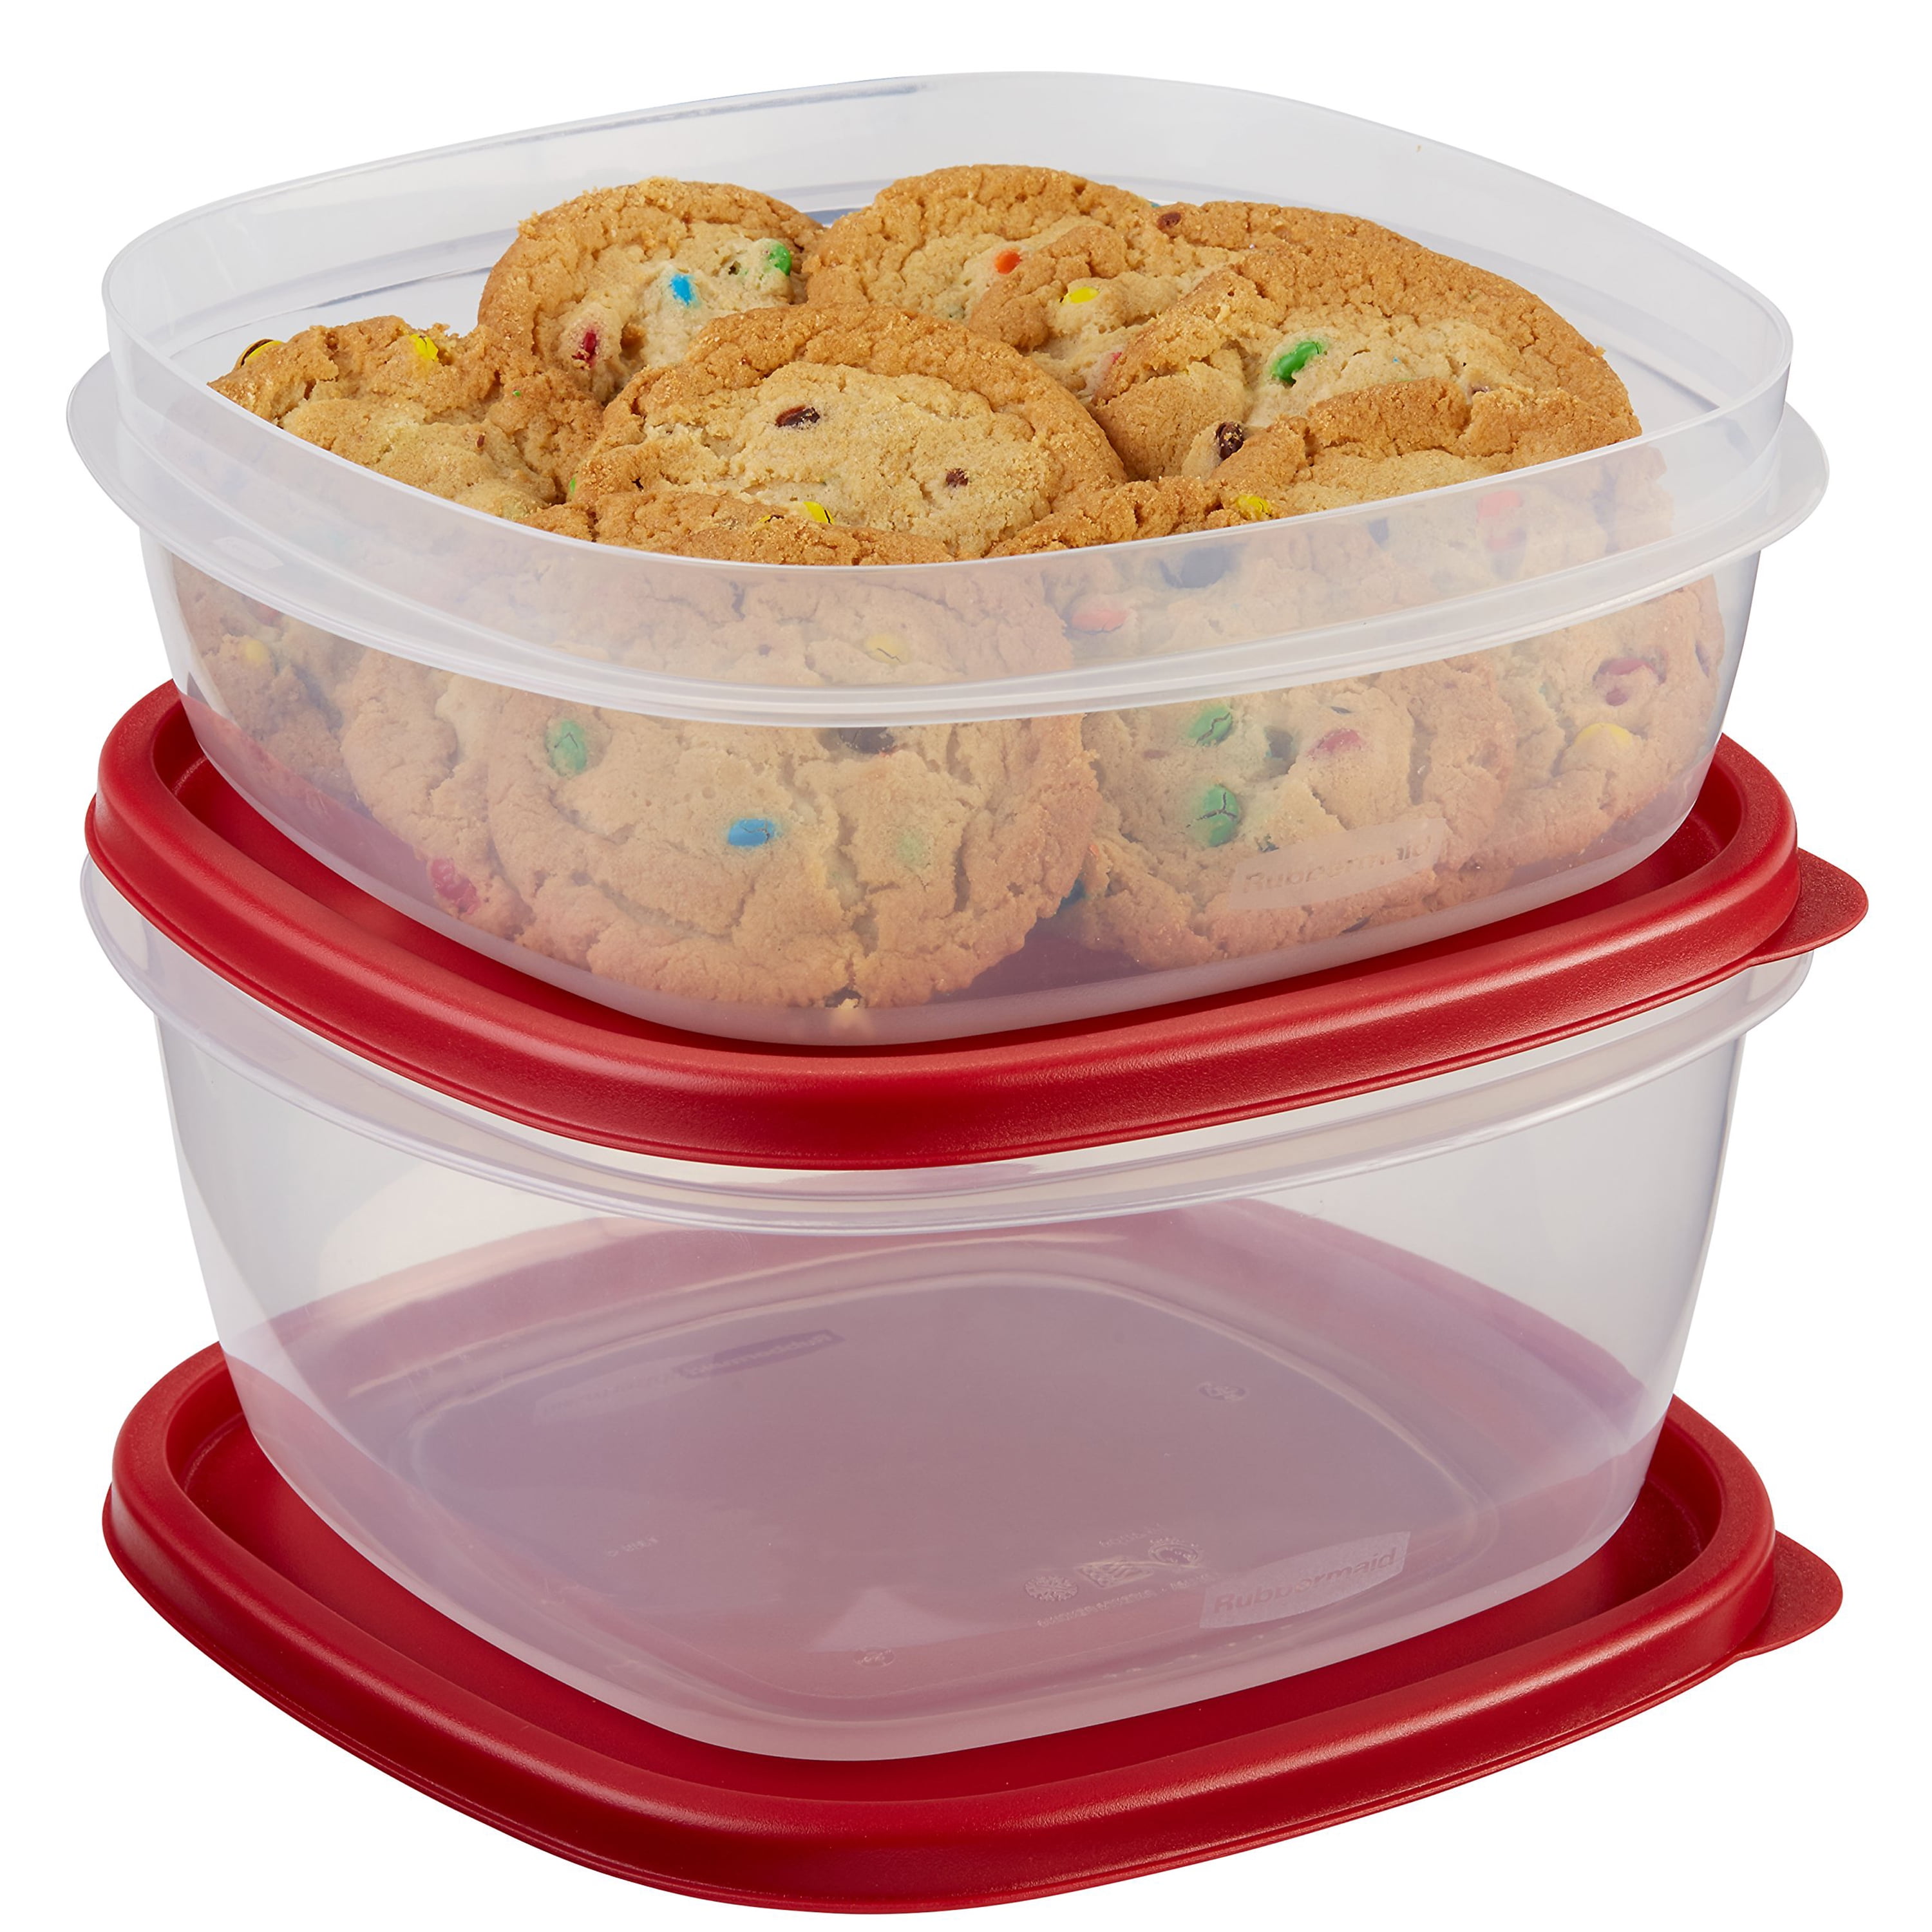 Rubbermaid Easy Find Lid Square 1-1/4-Cup Food Storage Container, 1 Count  (Pack of 8)